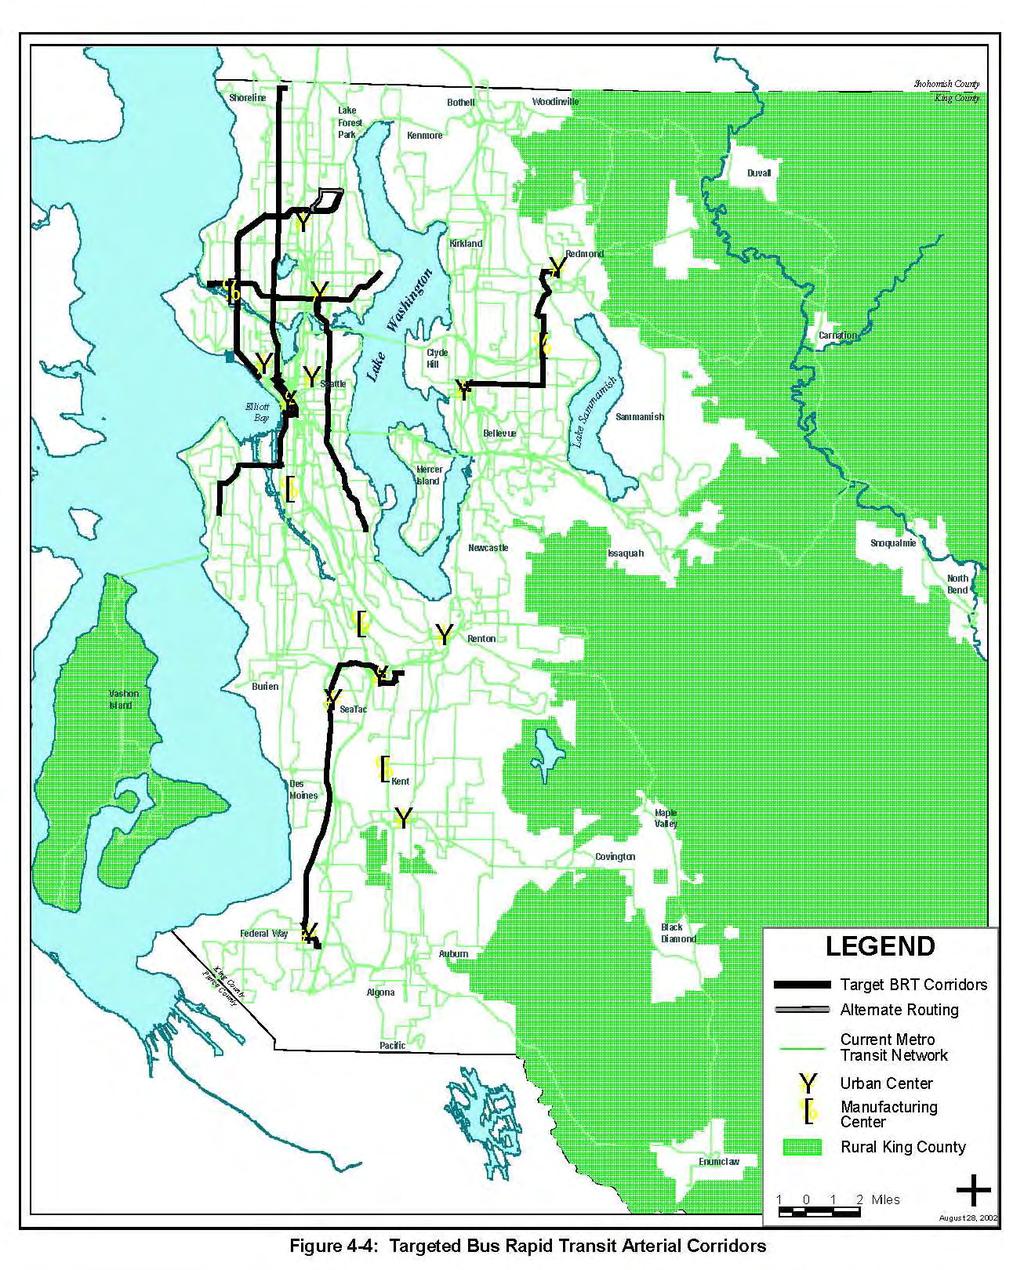 Review of Plans Pertinent to the Federal Way Transit Extension Source: King County Metro, 2002.